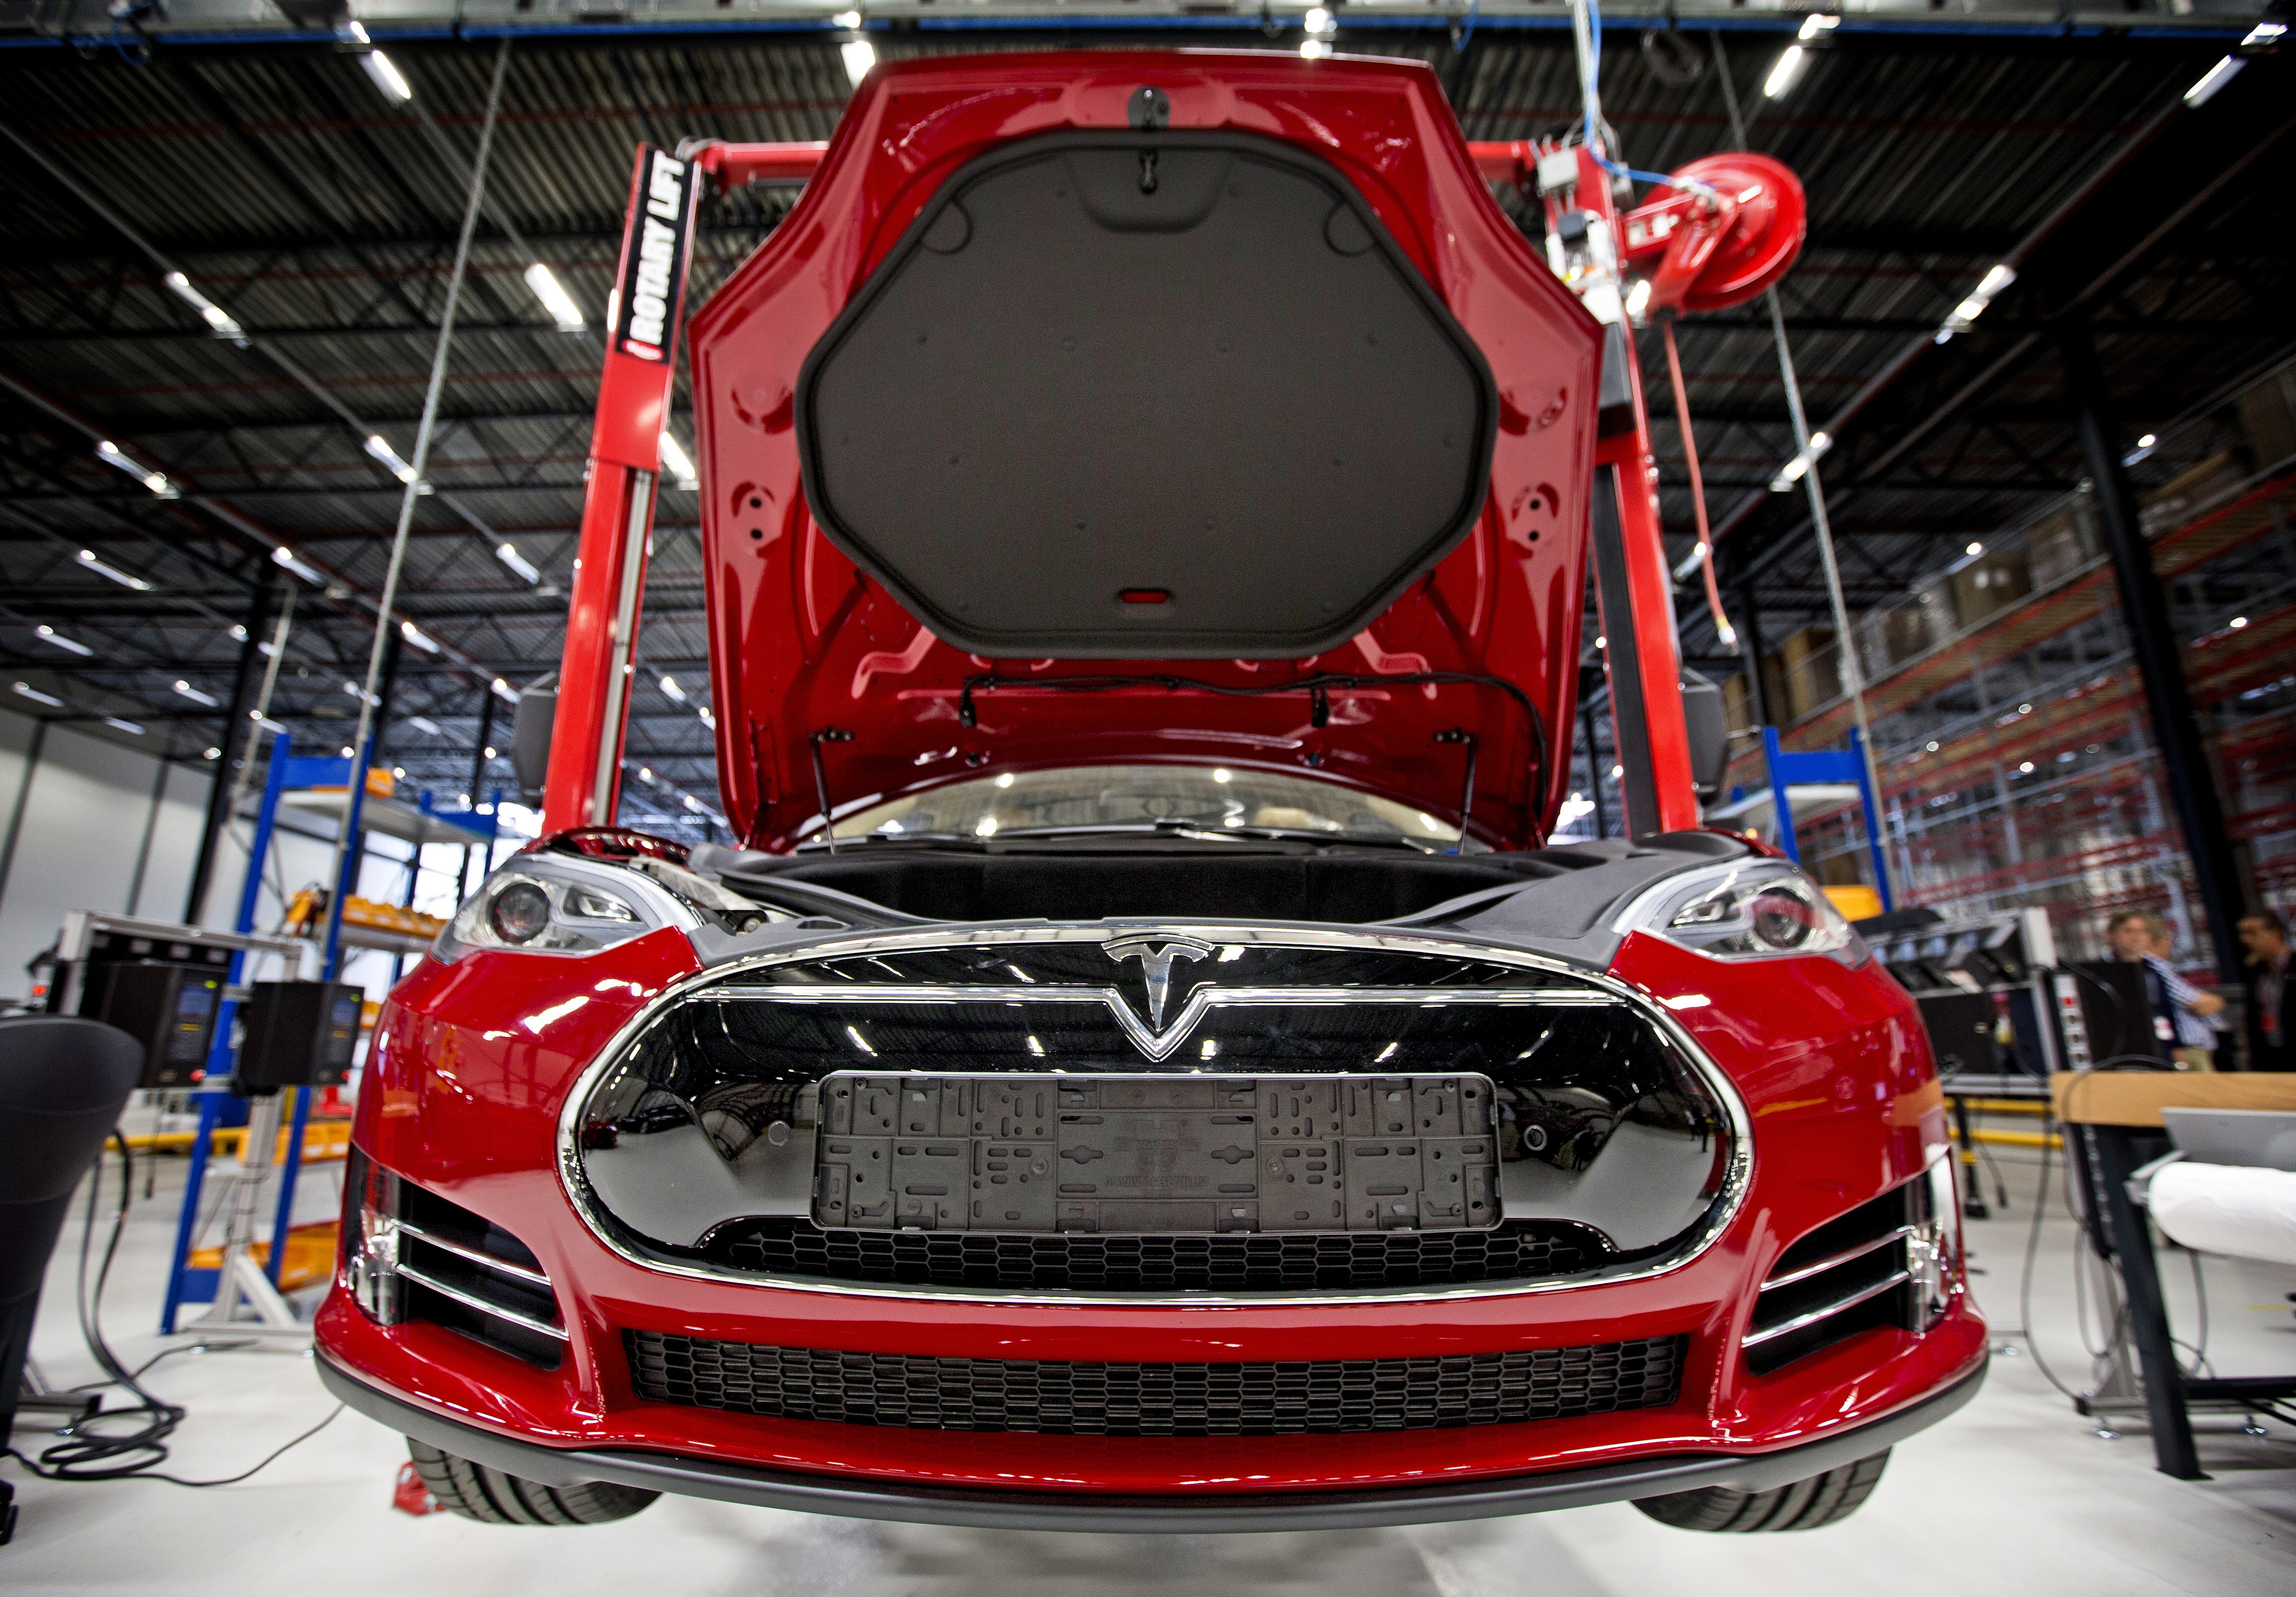 Tesla reportedly made deal to open a manufacturing facility in Shanghai